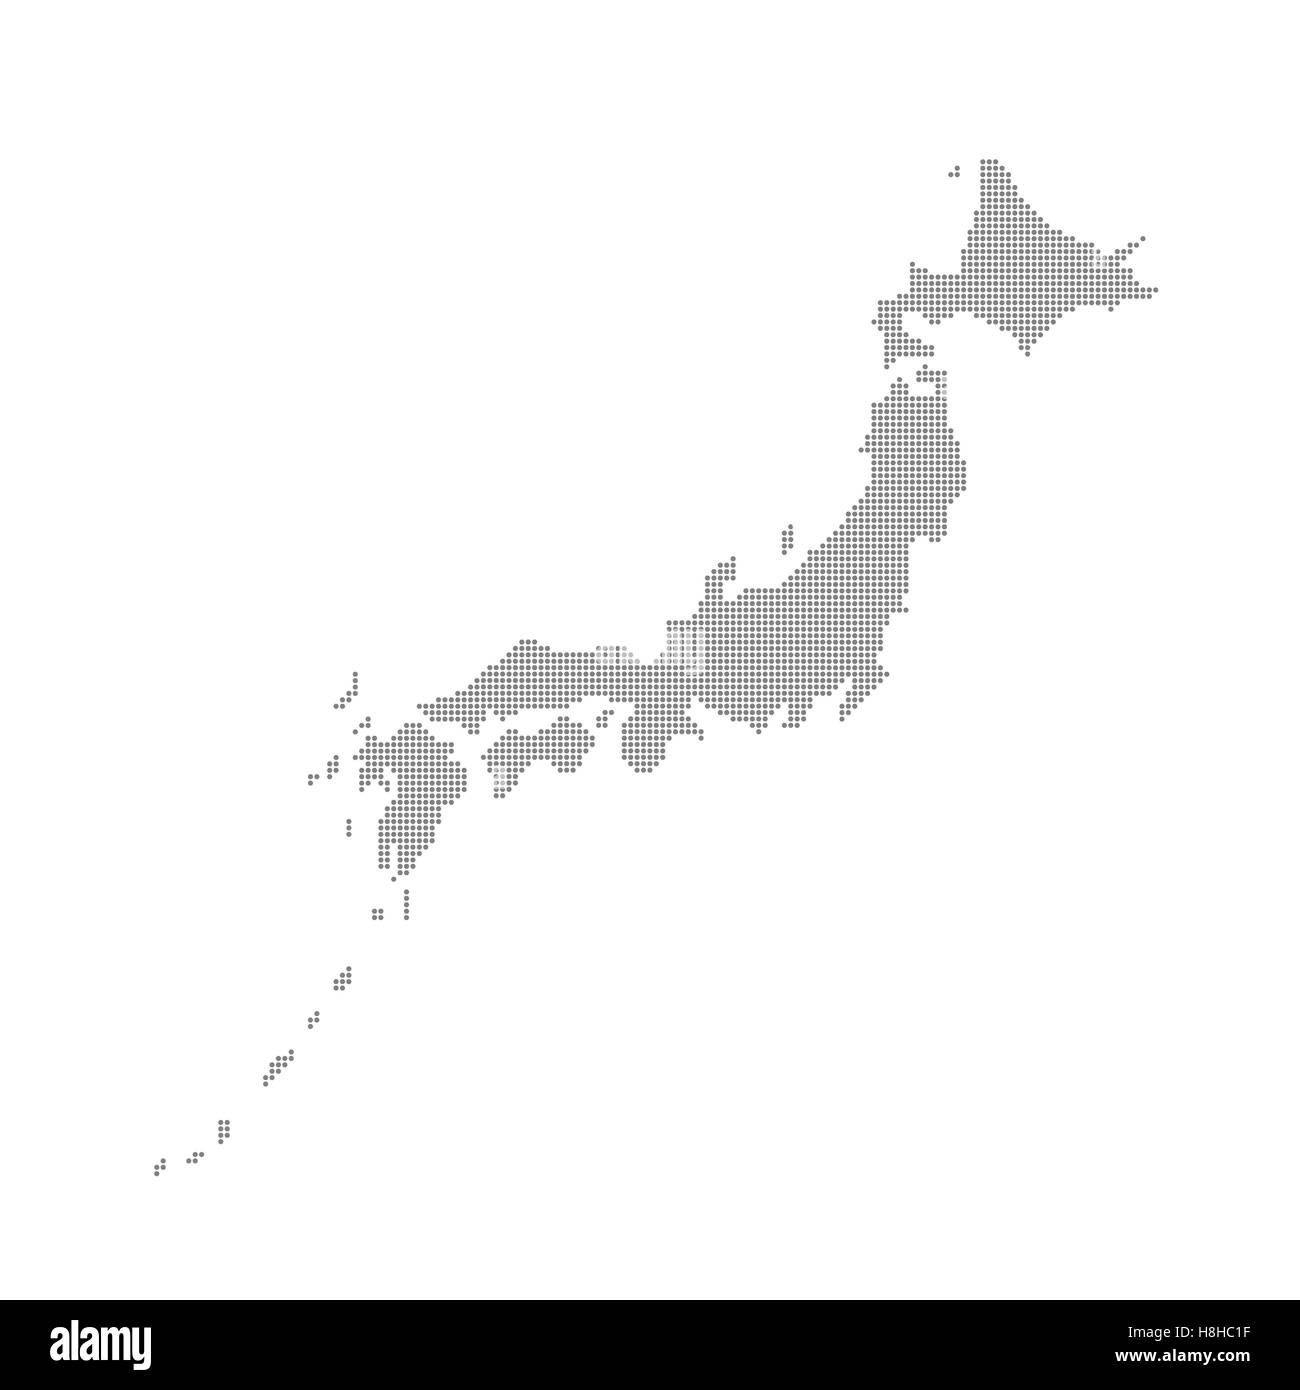 Grey Map Japan In The Dots . Vector illustration Stock Vector